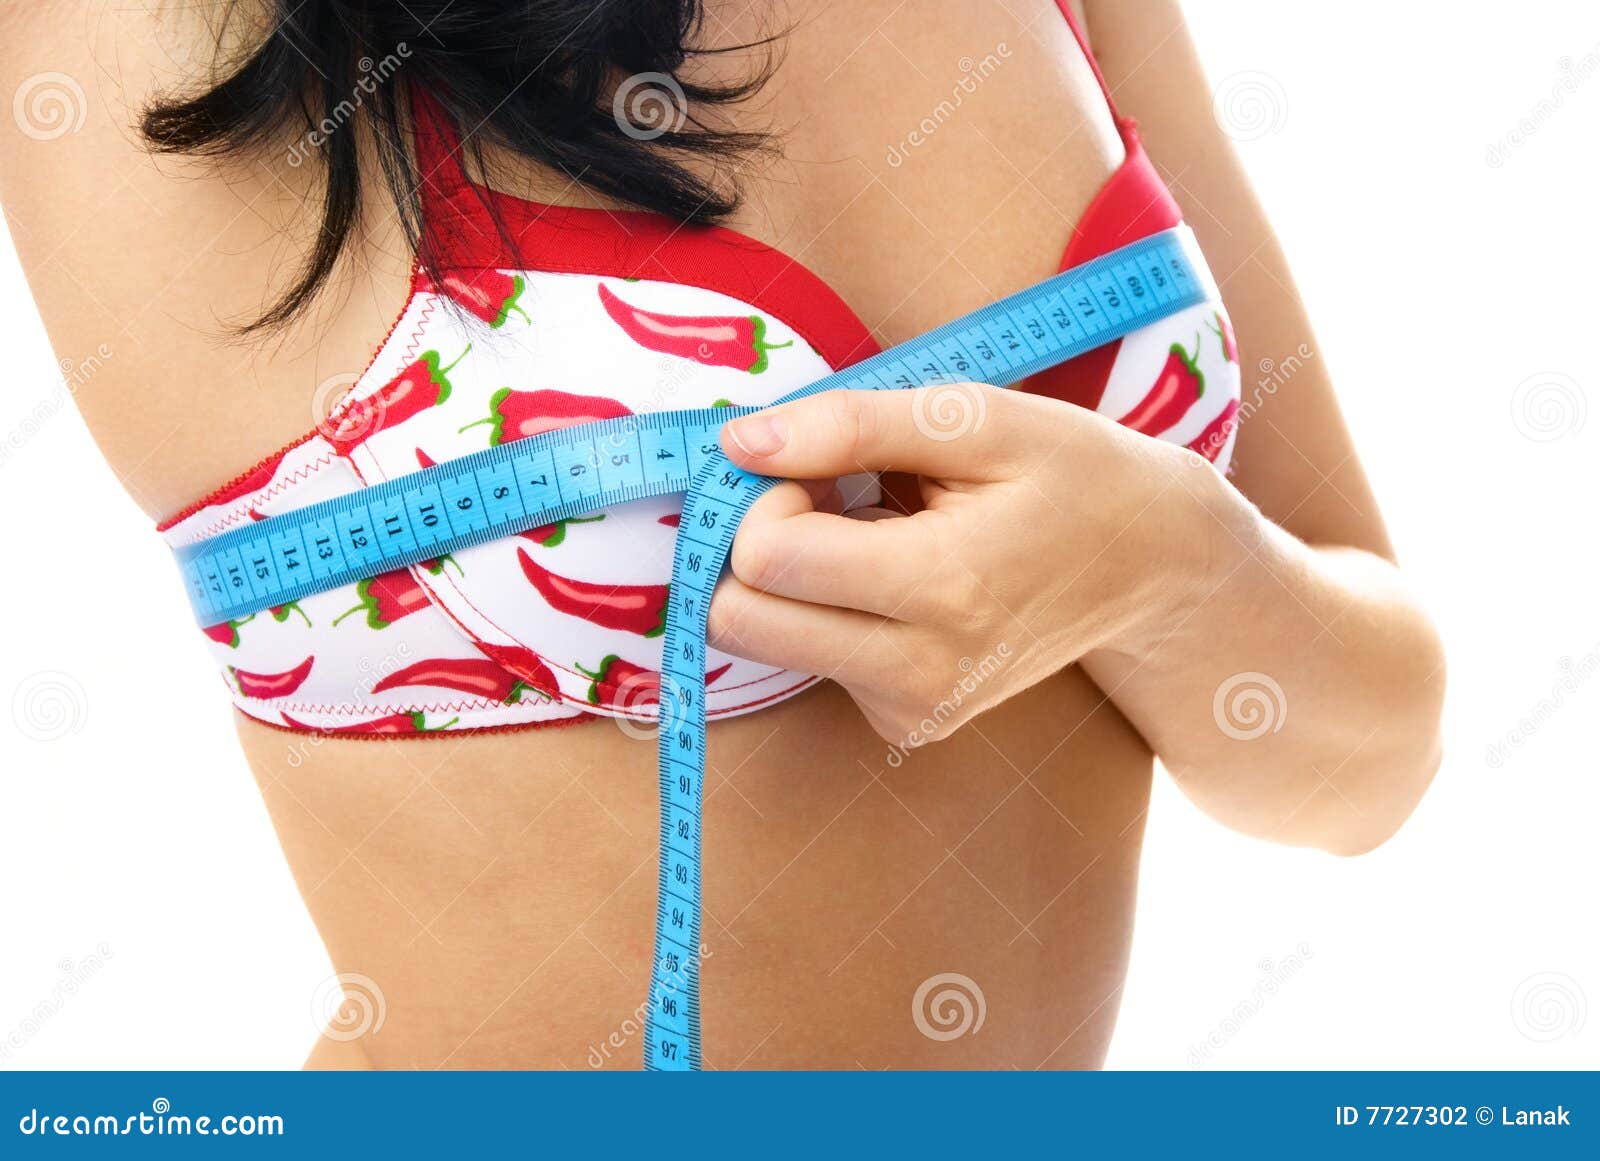 Girl Measures Her Nude Breast Measuring Tape. Isolated. Stock Photo,  Picture and Royalty Free Image. Image 48276345.